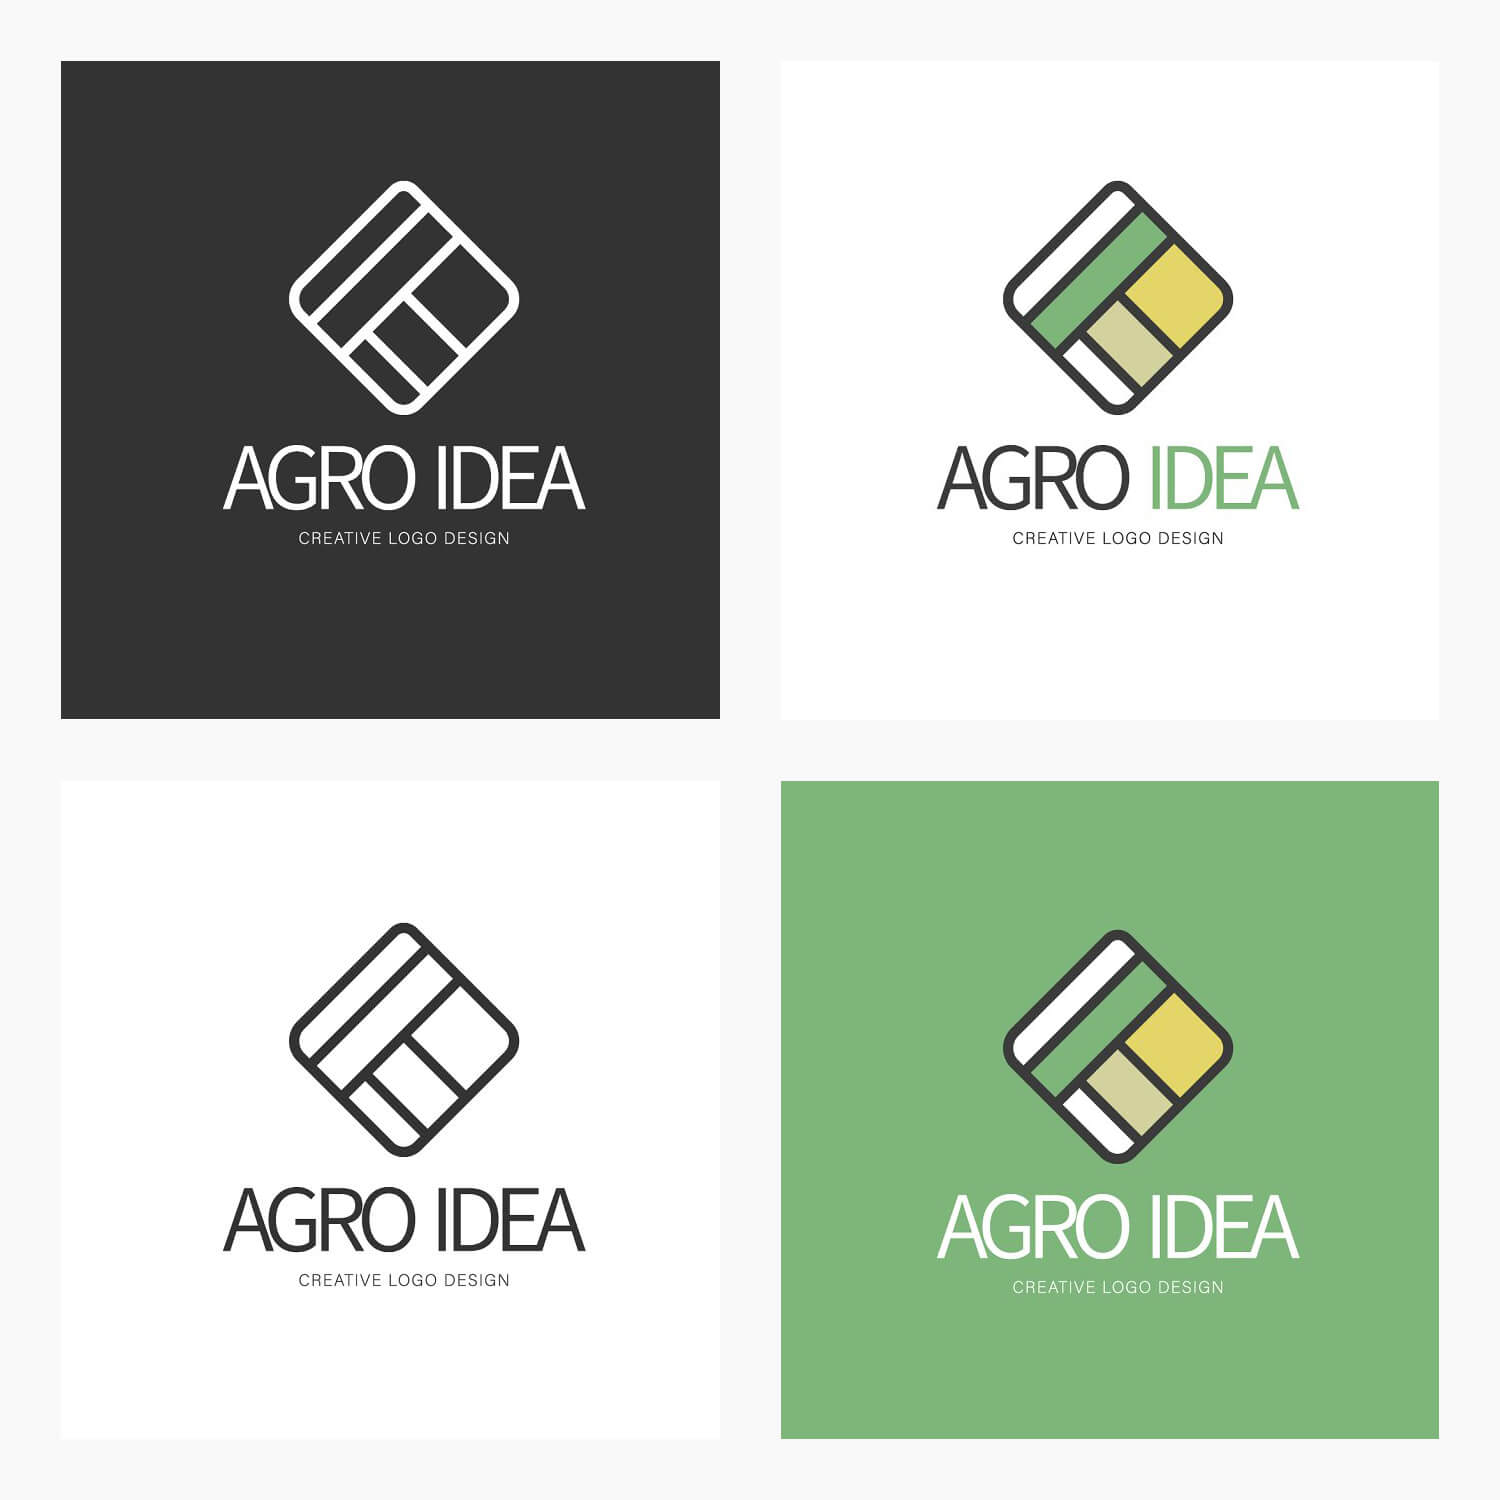 Four Agro Idea logos: the first is white on a gray background, the second is gray-green on a white background, the third is gray on a white background, the fourth is white-gray-green-yellow on a green background.